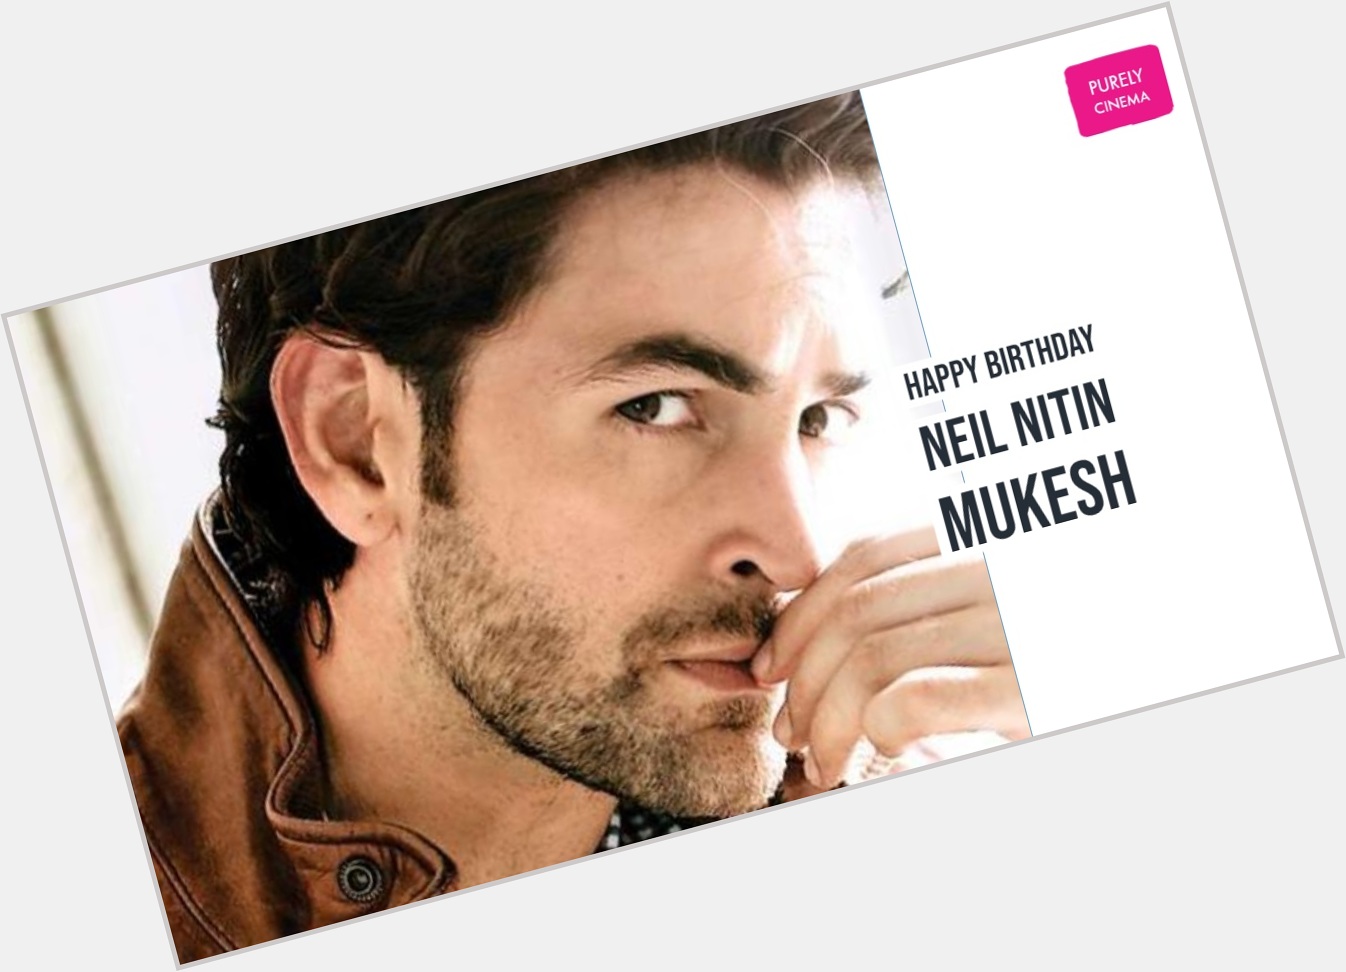 Wishing a very happy birthday to Bollywood actor Neil Nitin Mukesh. 